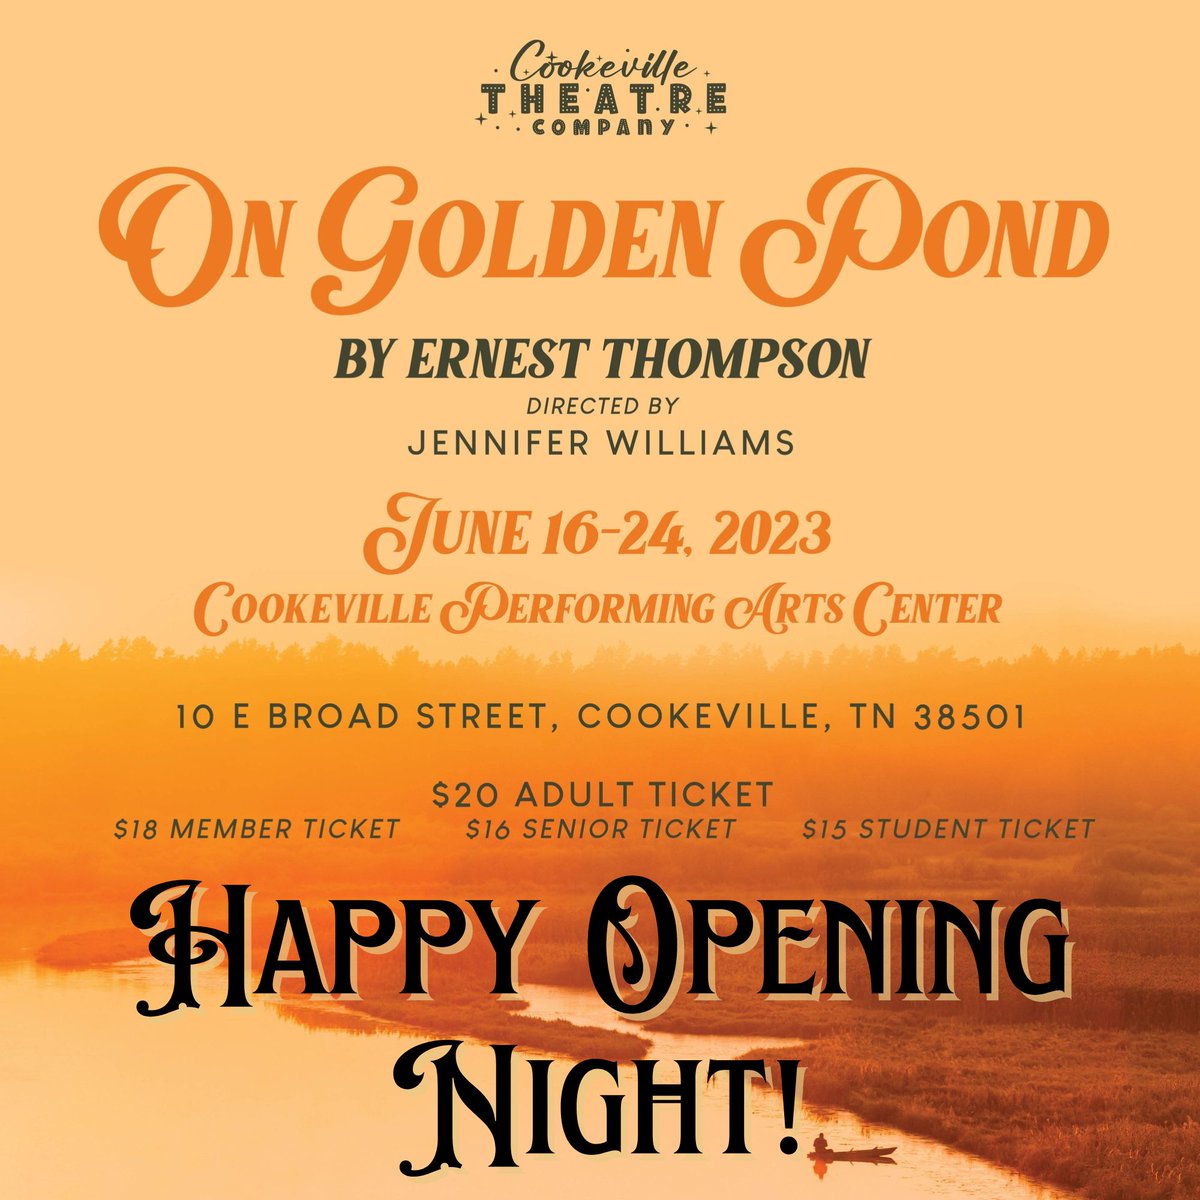 Happy Opening Night to the cast and crew of Cookeville Theatre Company's production of ON GOLDEN POND!

#cpactn #ctc #openingnight #theatre